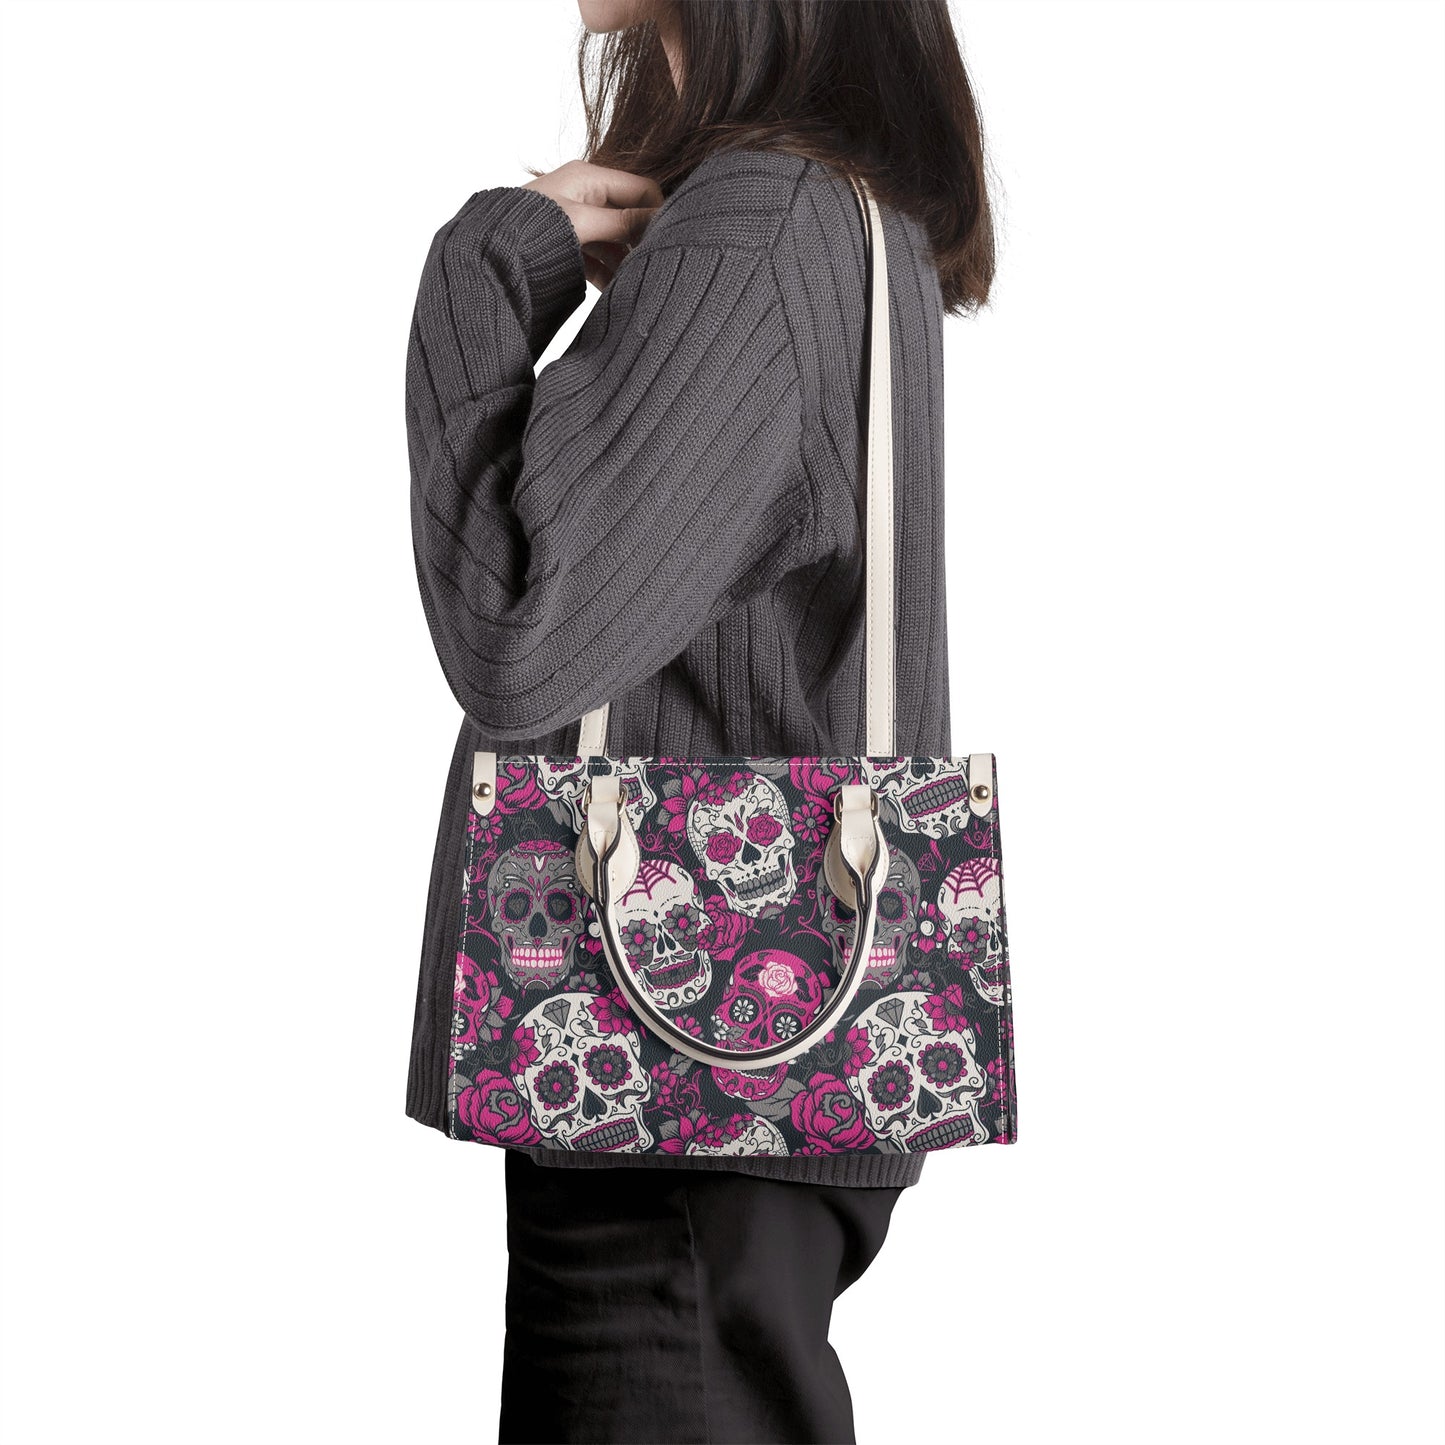 Mexico shoulder bag, floral sugar skull cosmetic bag, day of the dead bag with shoulder strap, cinco de mayo skull wallet, cinco de mayo skull handbag, mexico cosmet